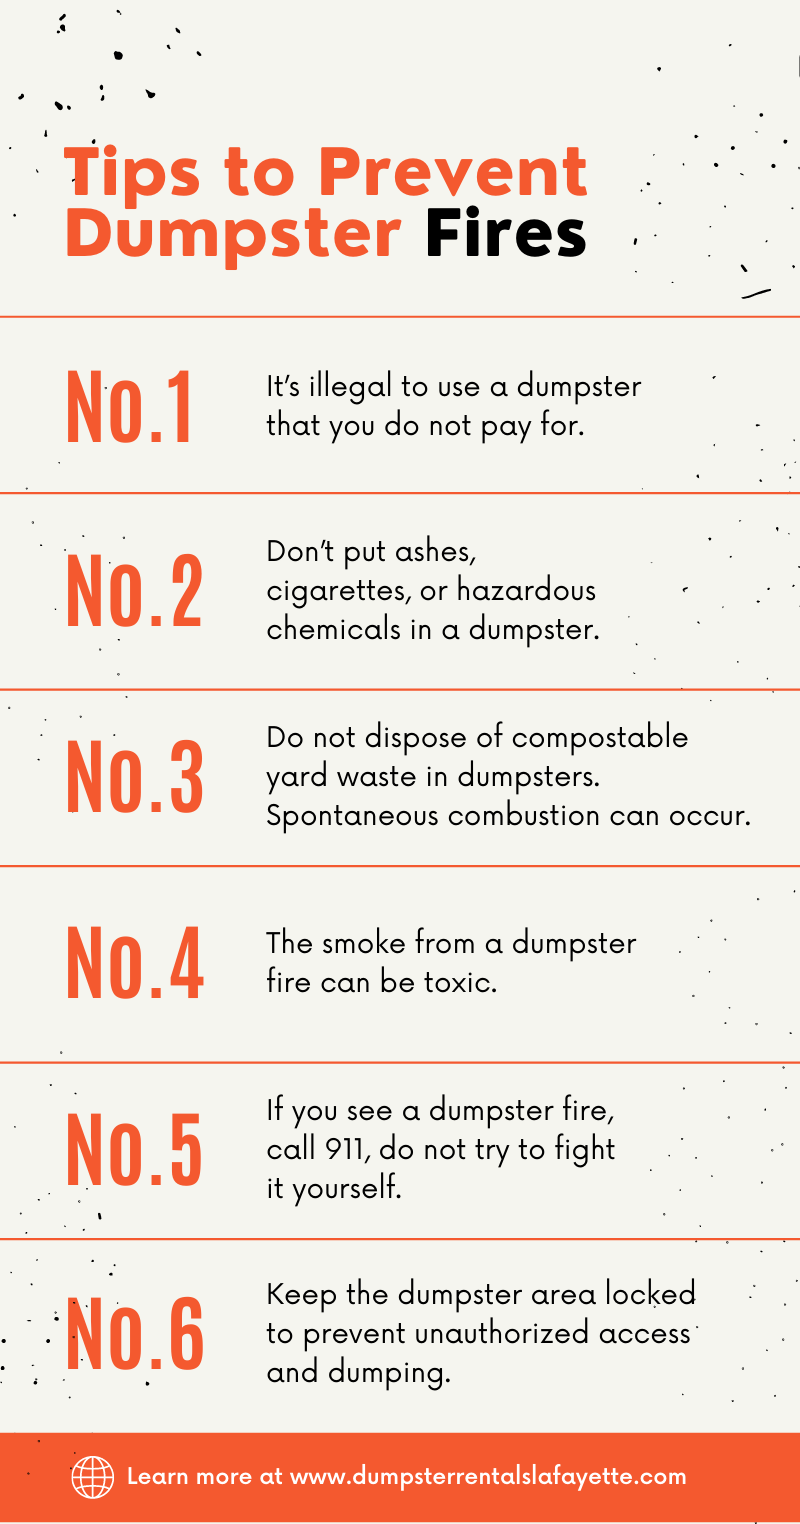 how to prevent dumpster fires infographic